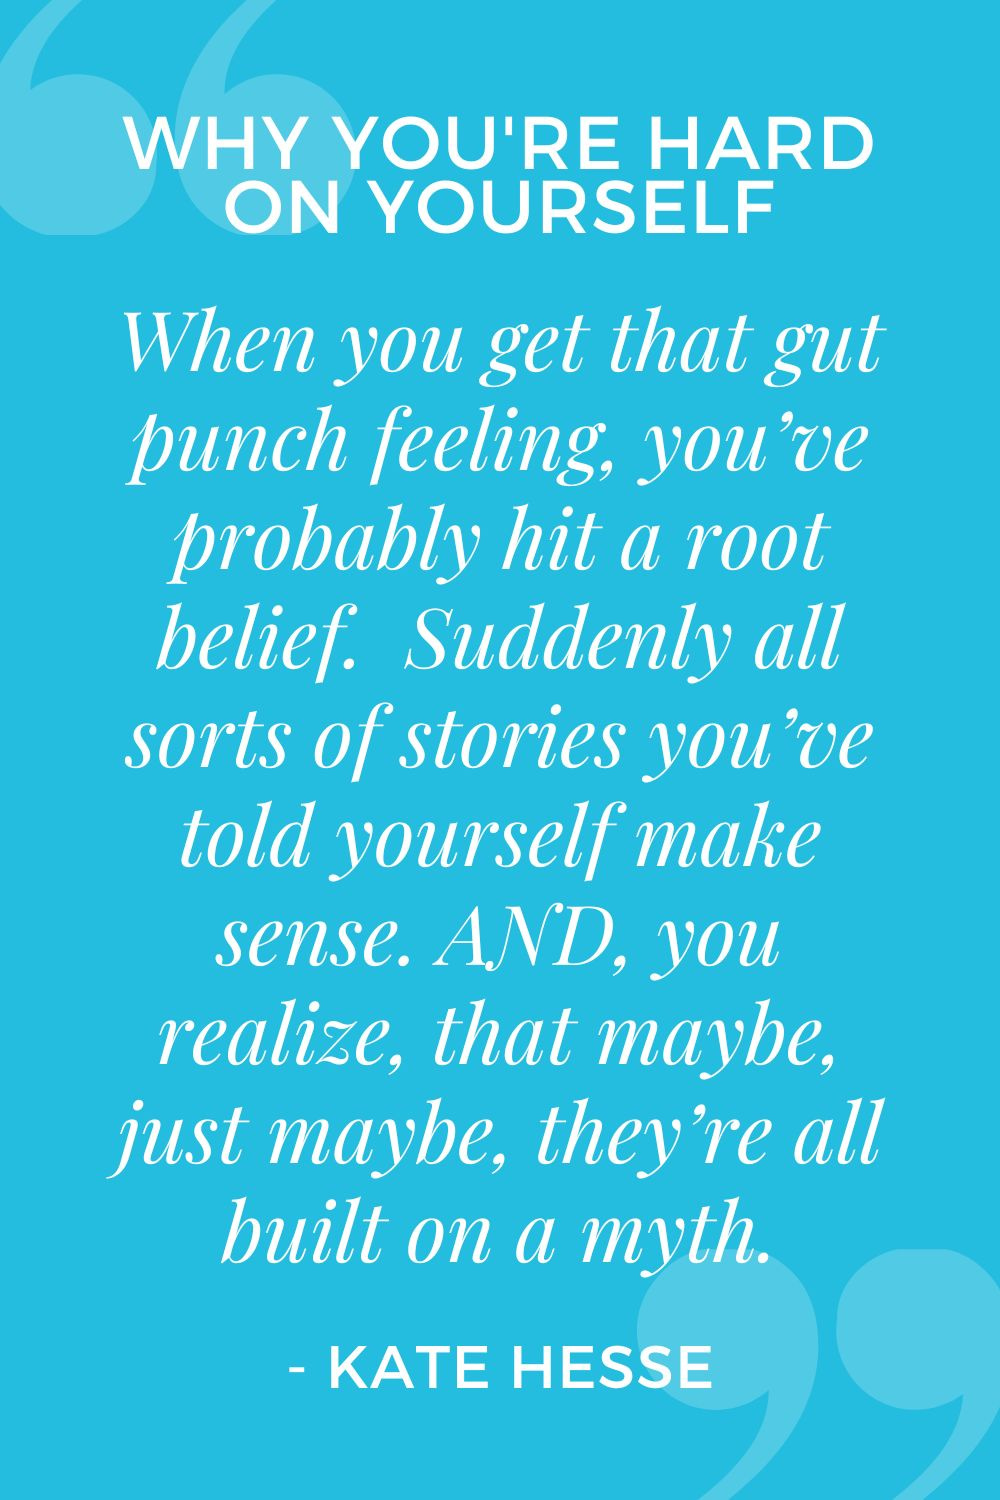 When you get that gut punch feeling, you've probably hit a root belief. Suddenly all sorts of stories you've told yourself make sense. AND, you realize, that maybe, just maybe, they're all built on a myth.